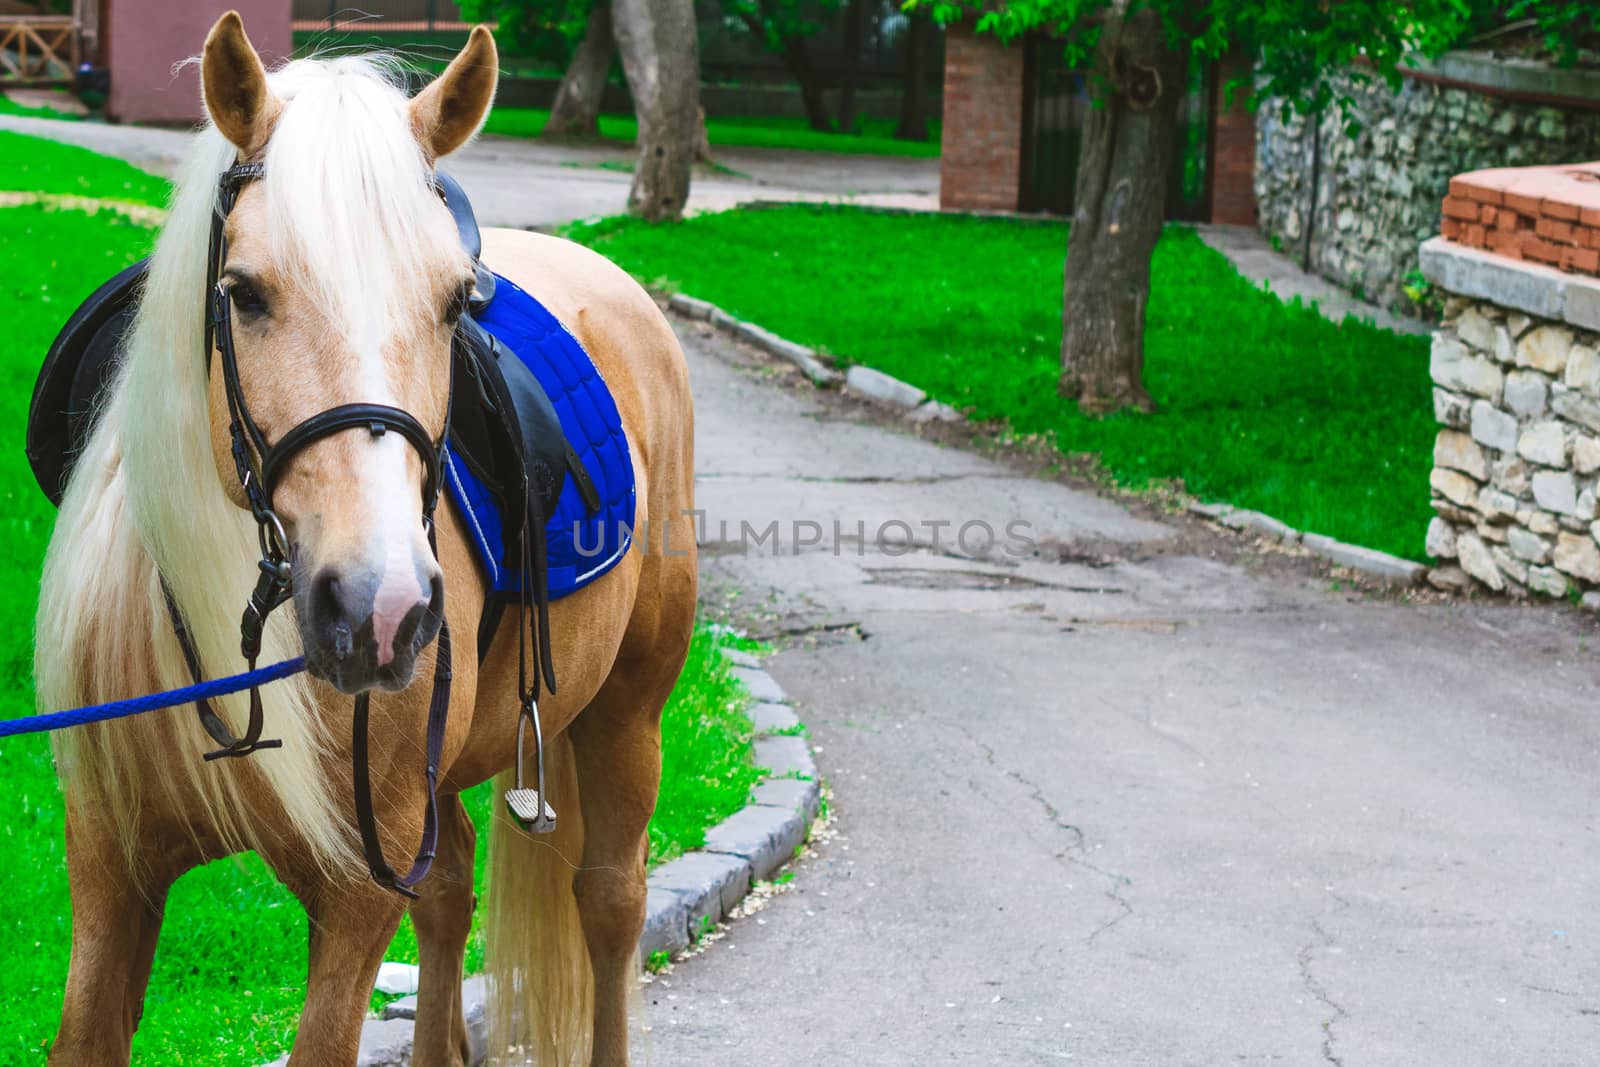 Horses saddled for leisurely riding in the Park by alexandr_sorokin